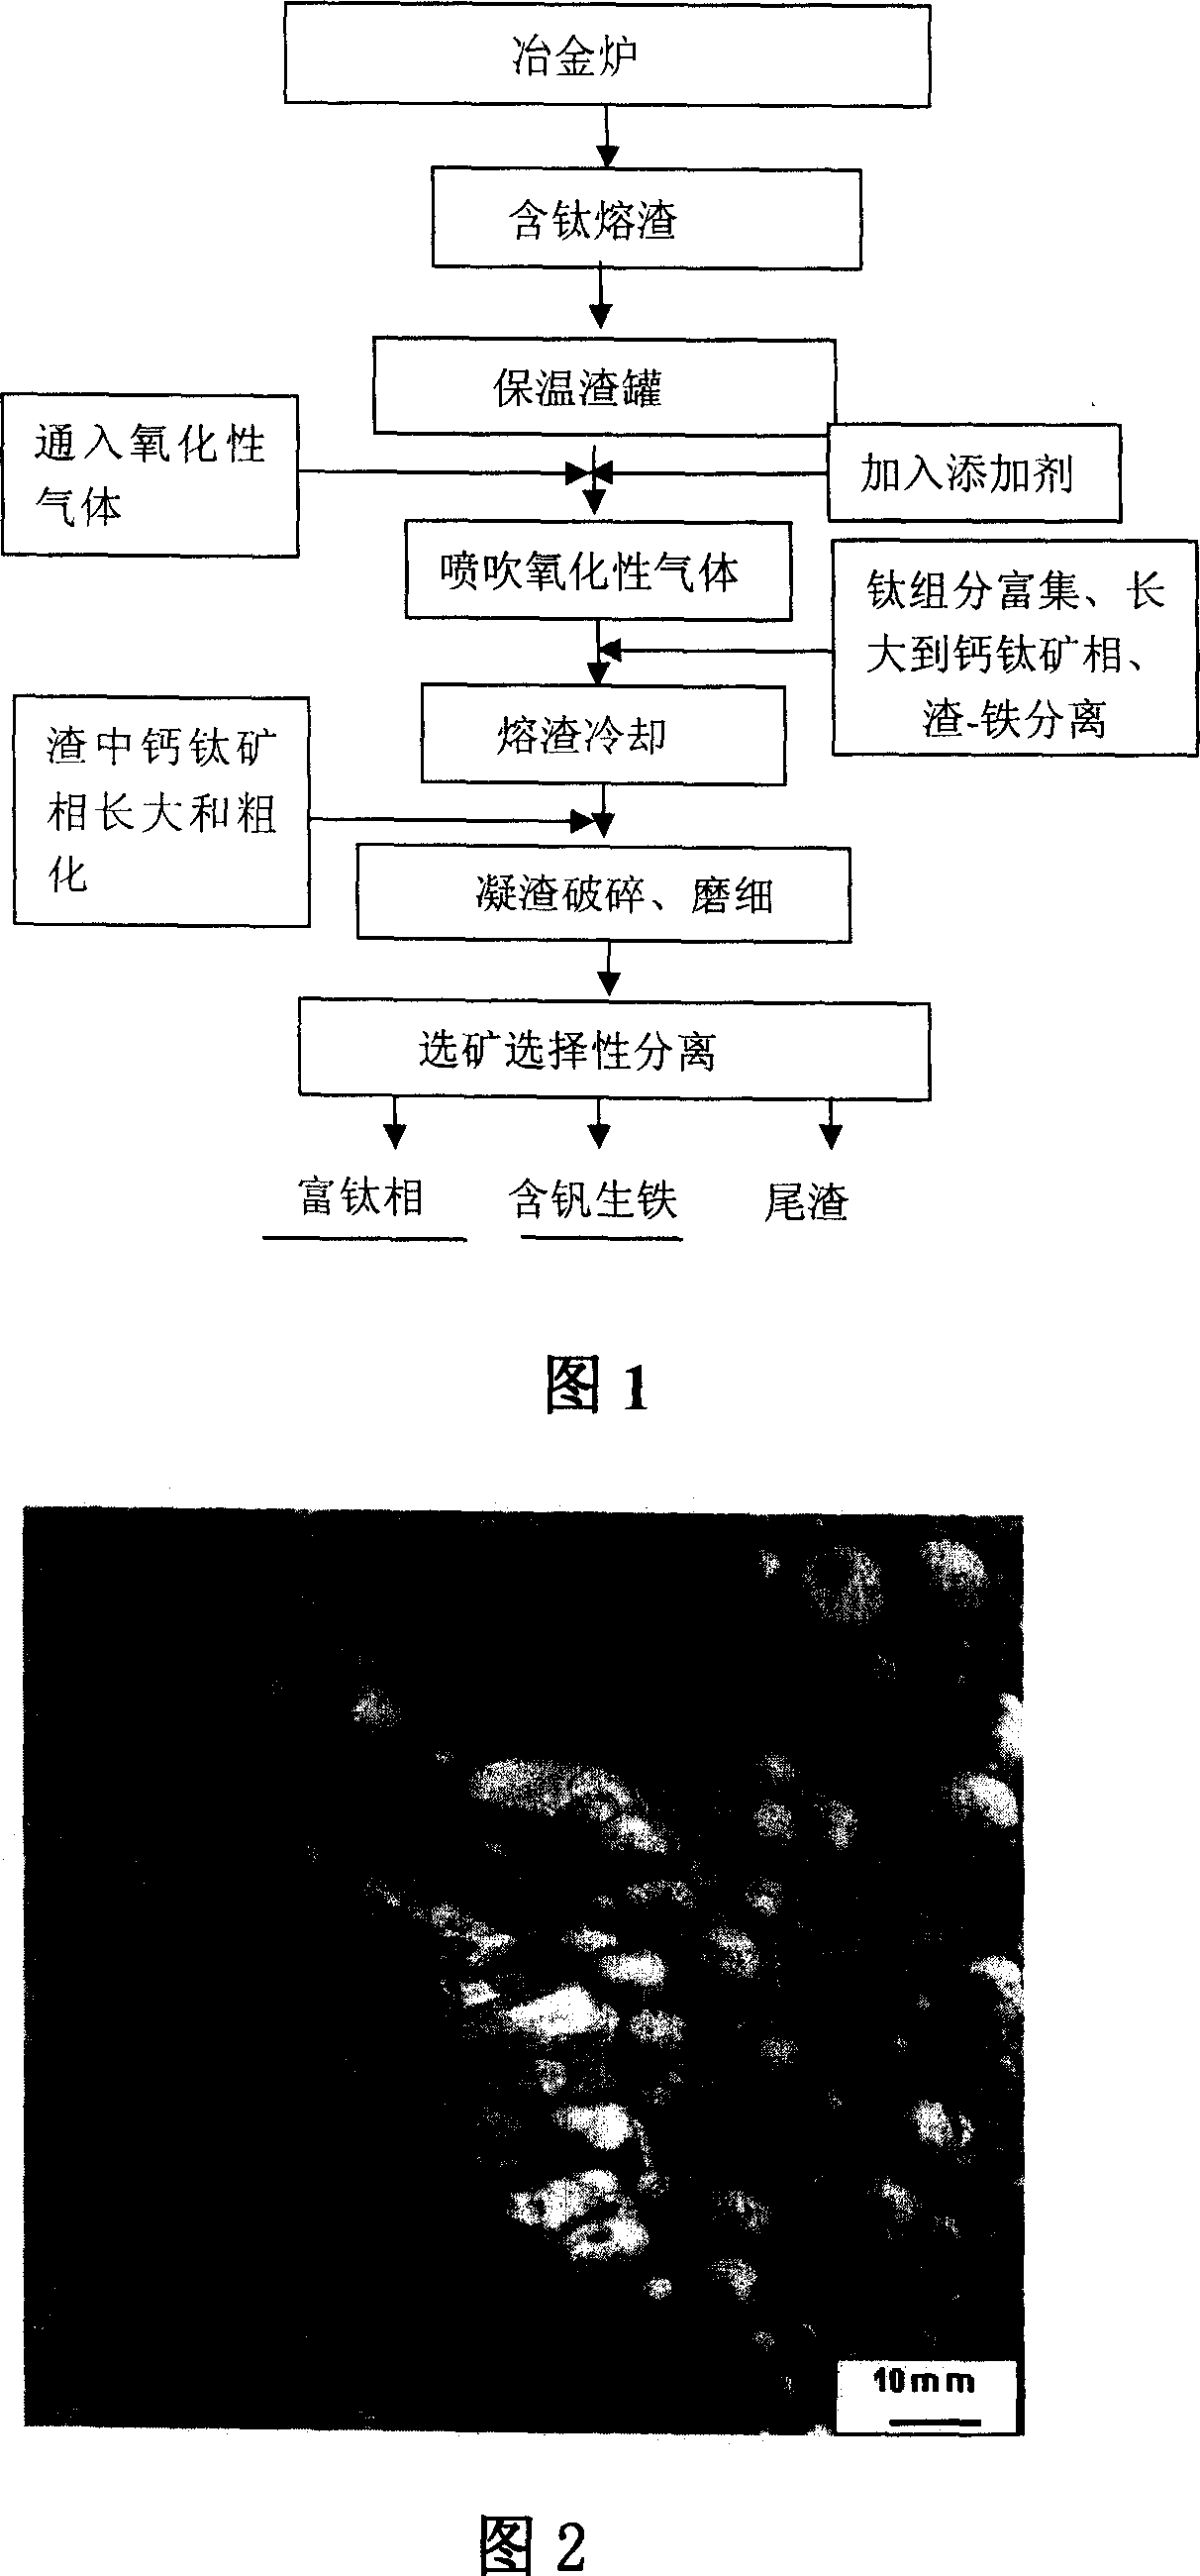 Process for separation and production of titanium-rich materials from titanium-containing blast furnace slag